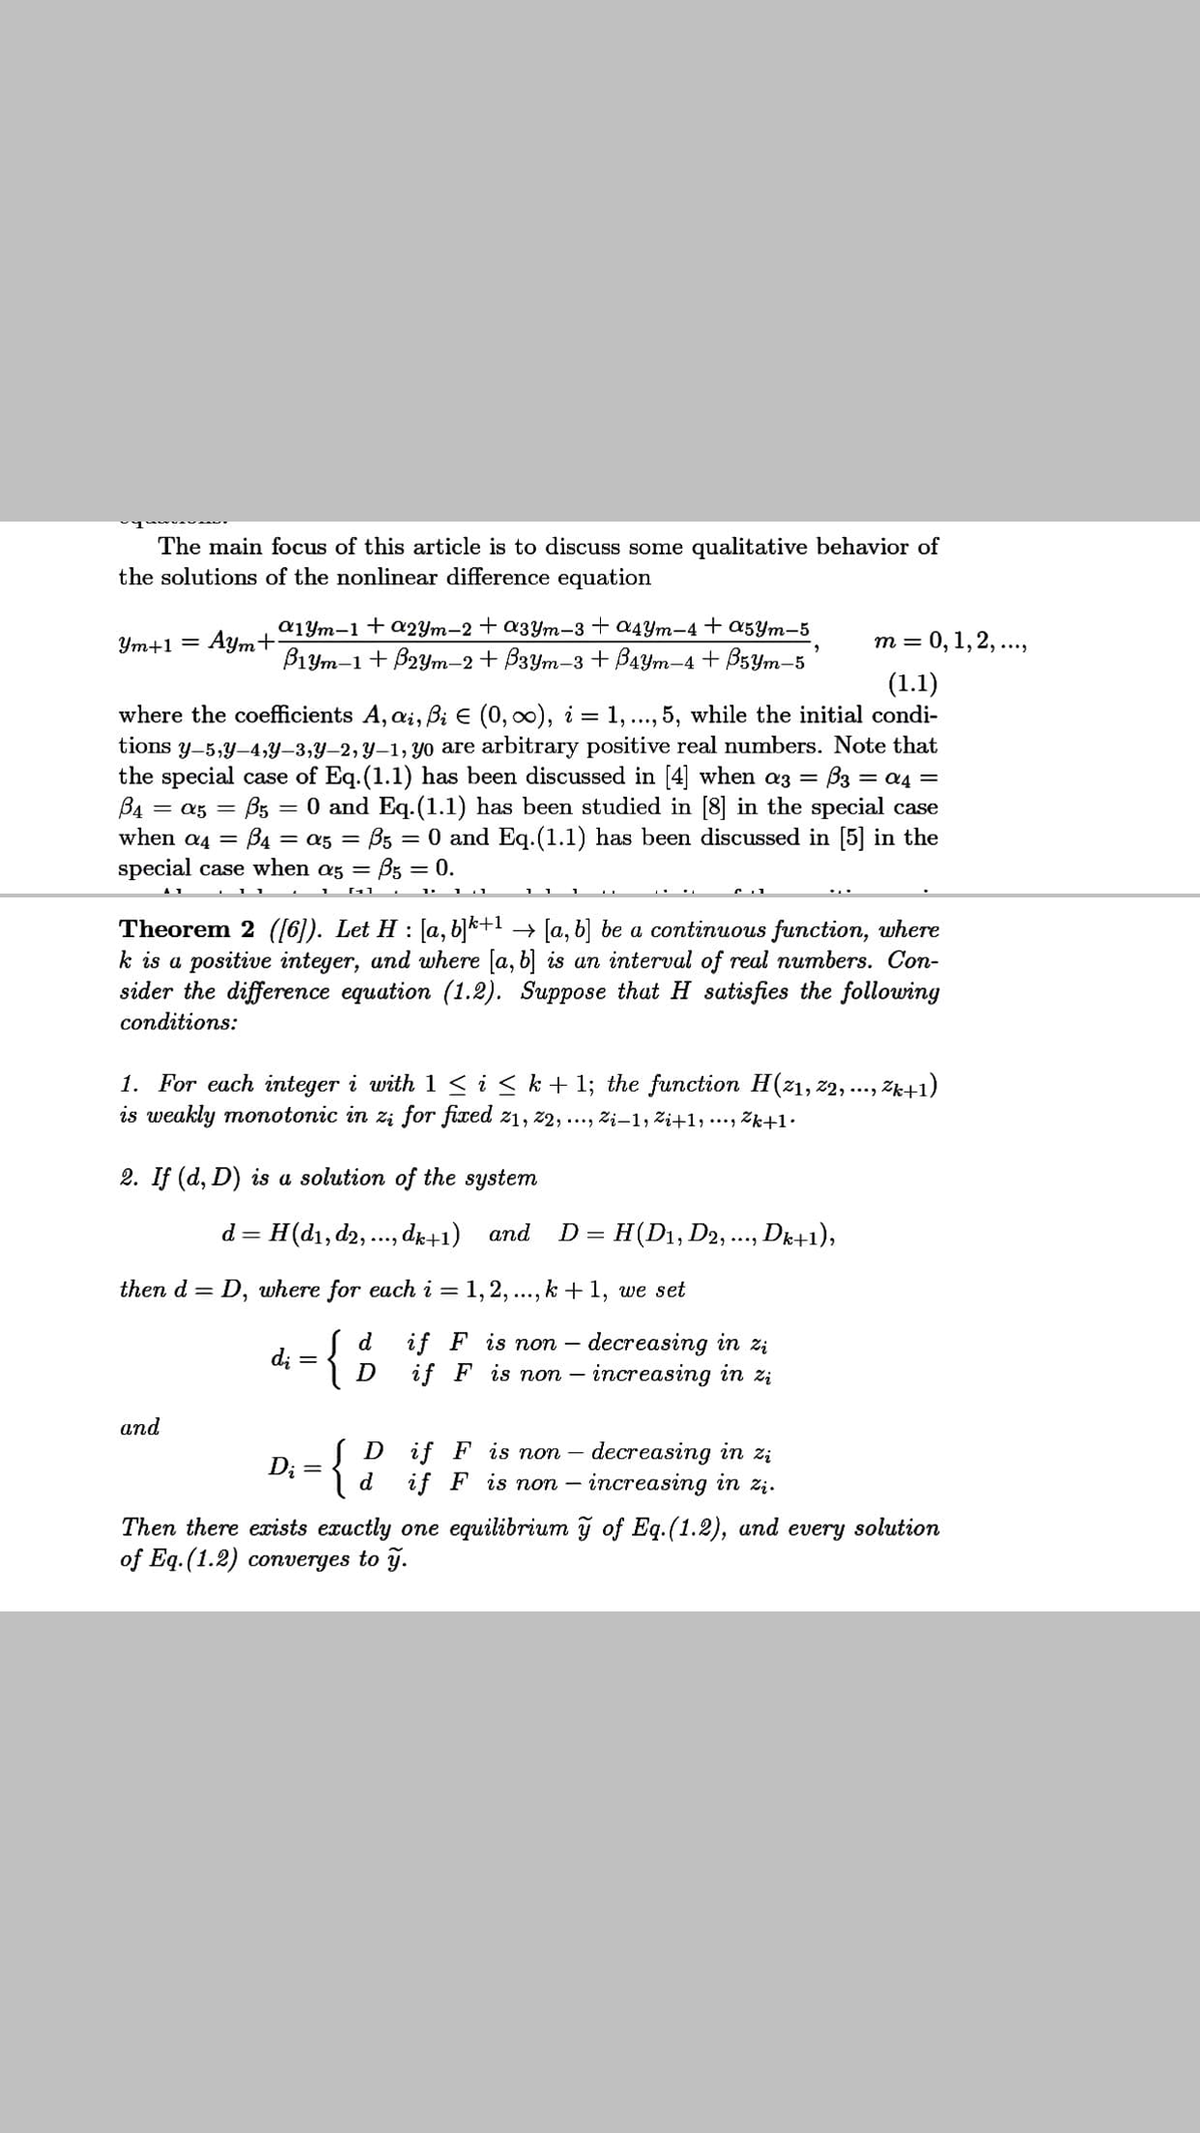 The main focus of this article is to discuss some qualitative behavior of
the solutions of the nonlinear difference equation
a1Ym-1+a2Ym-2 + a3ym-3+ a4Ym-4 + a5Ym-5
Aym+
B1ym-1 + B2ym-2 + B3Ym-3 + B4Ym-4 + BsYm-5
т %3D 0, 1, 2, ...,
Ym+1 =
(1.1)
where the coefficients A, ai, Bi E (0, 00), i = 1, ..., 5, while the initial condi-
tions y-5,y-4,Y–3,Y-2, y-1, yo are arbitrary positive real numbers. Note that
the special case of Eq.(1.1) has been discussed in [4] when az =
B4
when a4 = B4 = a5 = B5 = 0 and Eq.(1.1) has been discussed in [5] in the
special case when az = B5 = 0.
B3 = a4 =
B5 = 0 and Eq.(1.1) has been studied in [8] in the special case
= a5 =
Theorem 2 ([6). Let H : [a, b]k+1 → [a, b] be a continuous function, where
k is a positive integer, and where [a, b] is an interval of real numbers. Con-
sider the difference equation (1.2). Suppose that H satisfies the following
conditions:
1. For each integer i with1 < i < k+ 1; the function H(z1, z2, ..., Zk+1)
is weakly monotonic in zi for fixed z1, z2, ..., Zi-1, Zi+1, ..., Zk+1•
2. If (d, D) is a solution of the system
d = H(d1, d2, ., de+1) and D= H(D1, D2, .., Dk+1),
then d = D, where for each i = 1, 2,
..., k +1, we set
d
di = {
if F is non – decreasing in zi
if F is non – increasing in zi
D
аnd
{
(D if F is non – decreasing in z;
Di =
if
F is non – increasing in zị.
Then there exists exuctly one equilibrium y of Eq.(1.2), and every solution
of Eq. (1.2) converges to y.
